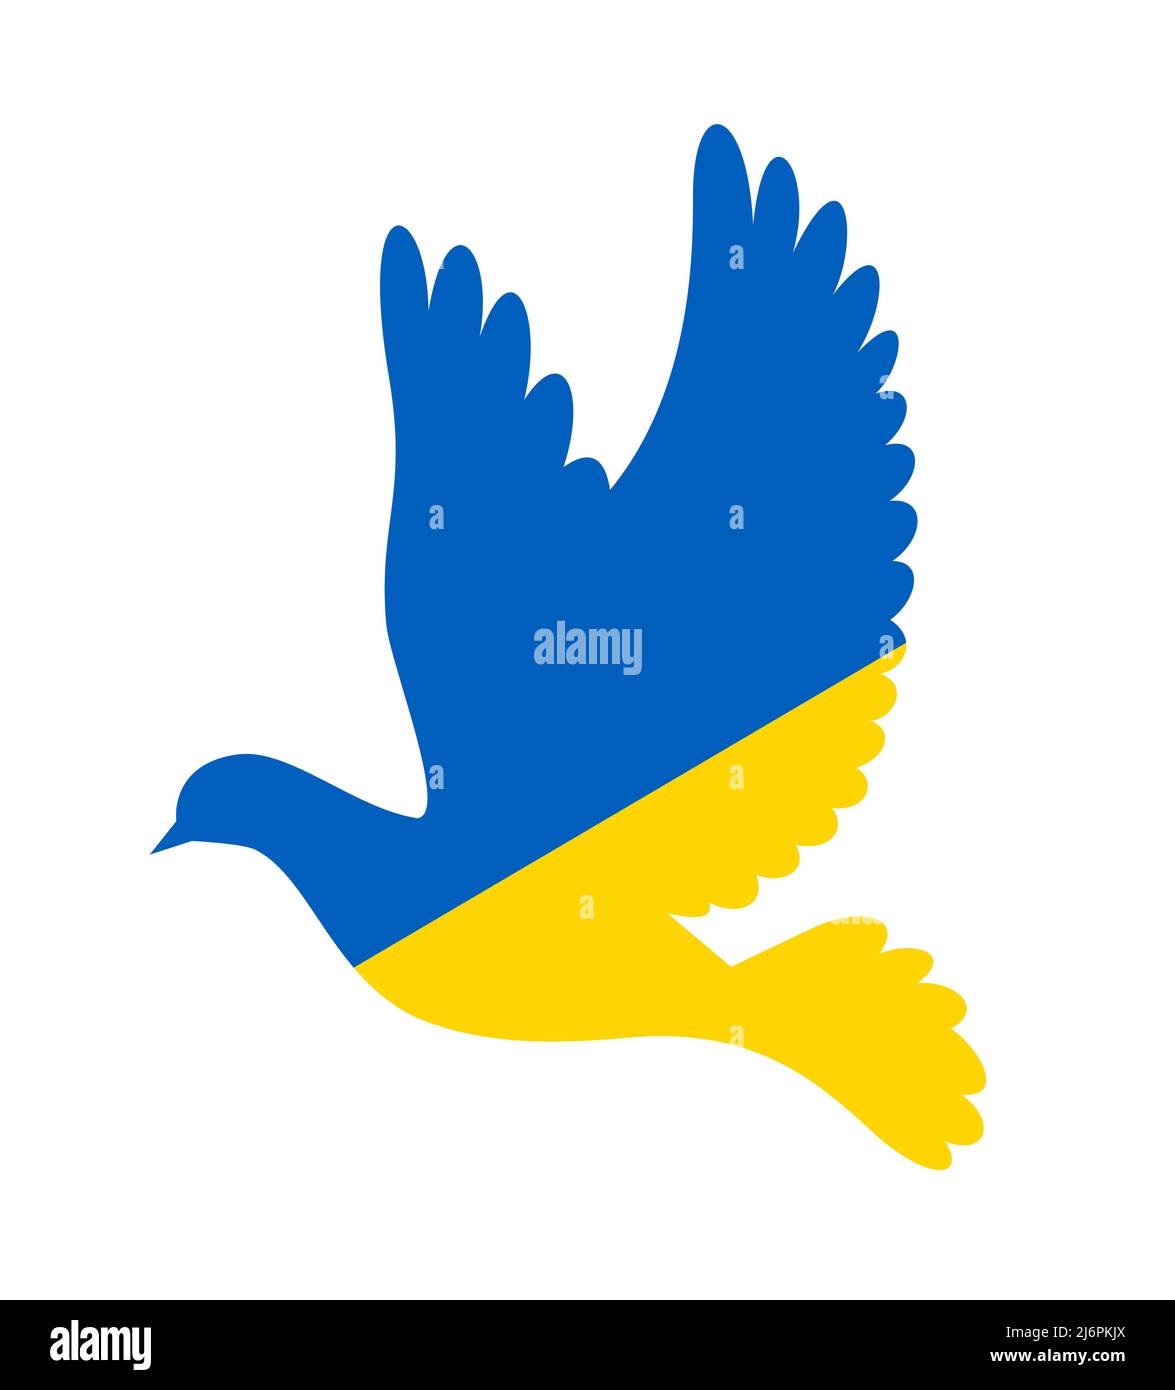 Ukraine national flag in peace dove form, peace for Ukraine concept, for banner and web design, vector illustration close-up Stock Vector